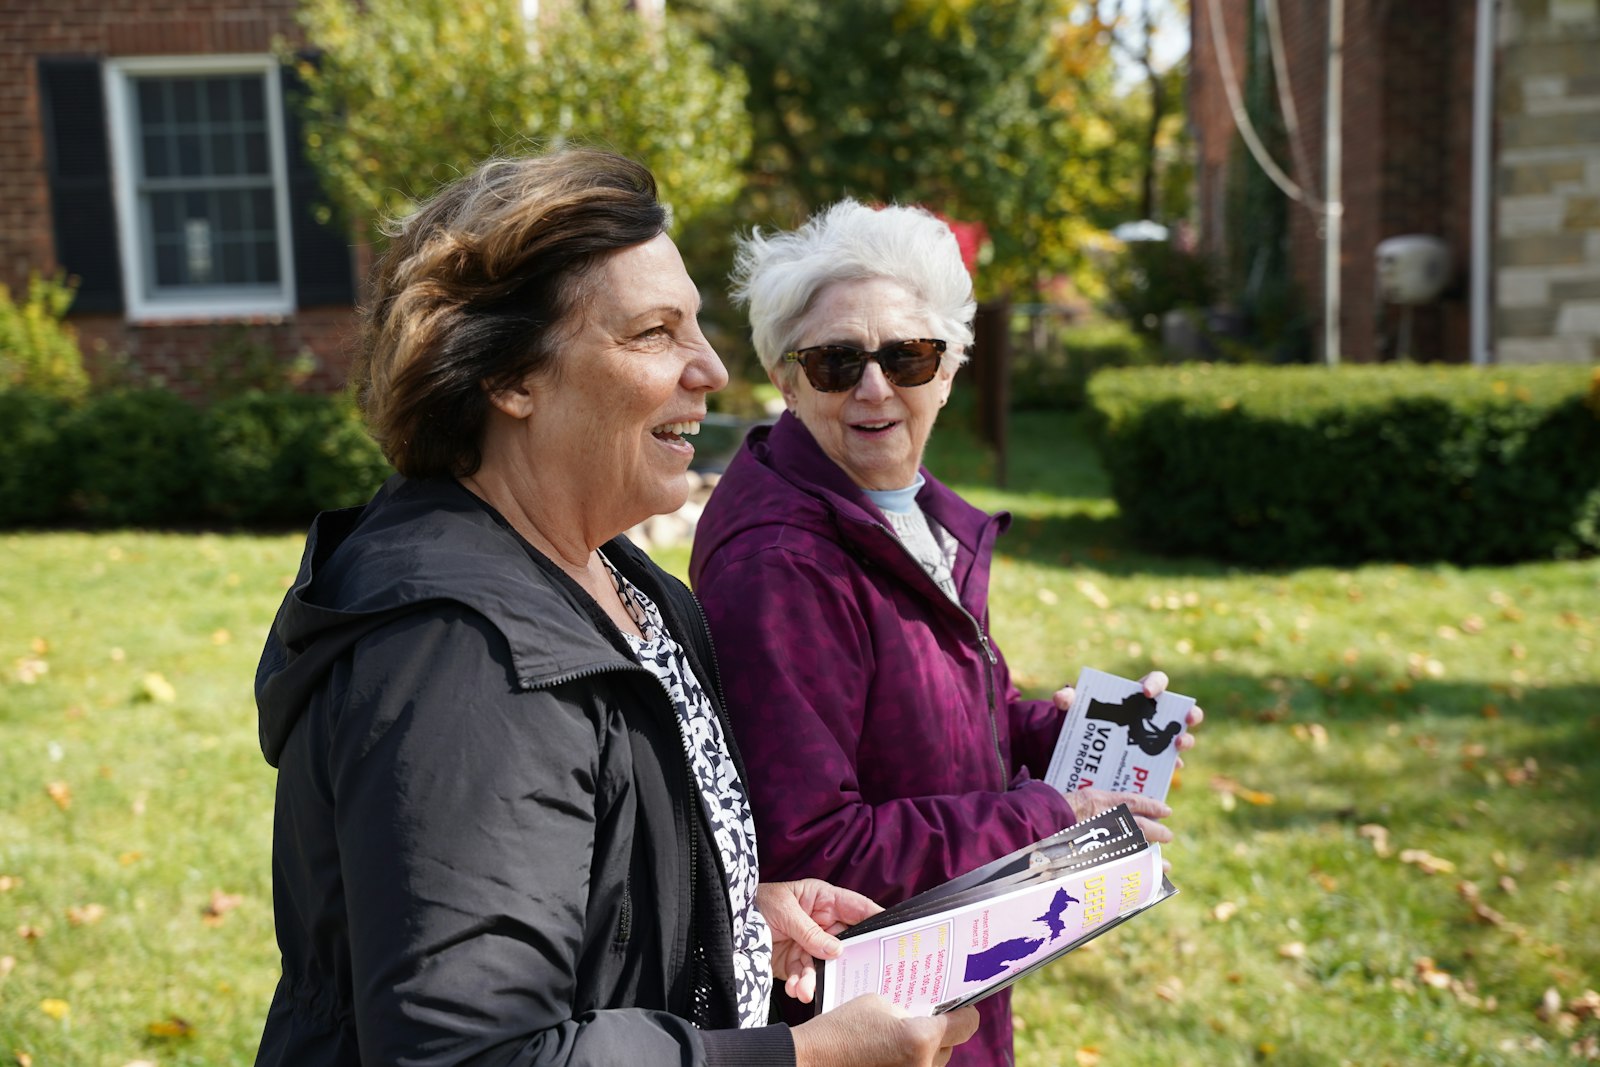 Paula Dixon, left, and Peggy Stack of the National Shrine of the Little Flower Basilica in Royal Oak, canvass a neighborhood in opposition to Proposal 3. Canvassers are encouraged to visit supportmiwomenandchildren.org to sign up to canvass, give to the "No on Proposal 3" campaign and order yard signs.